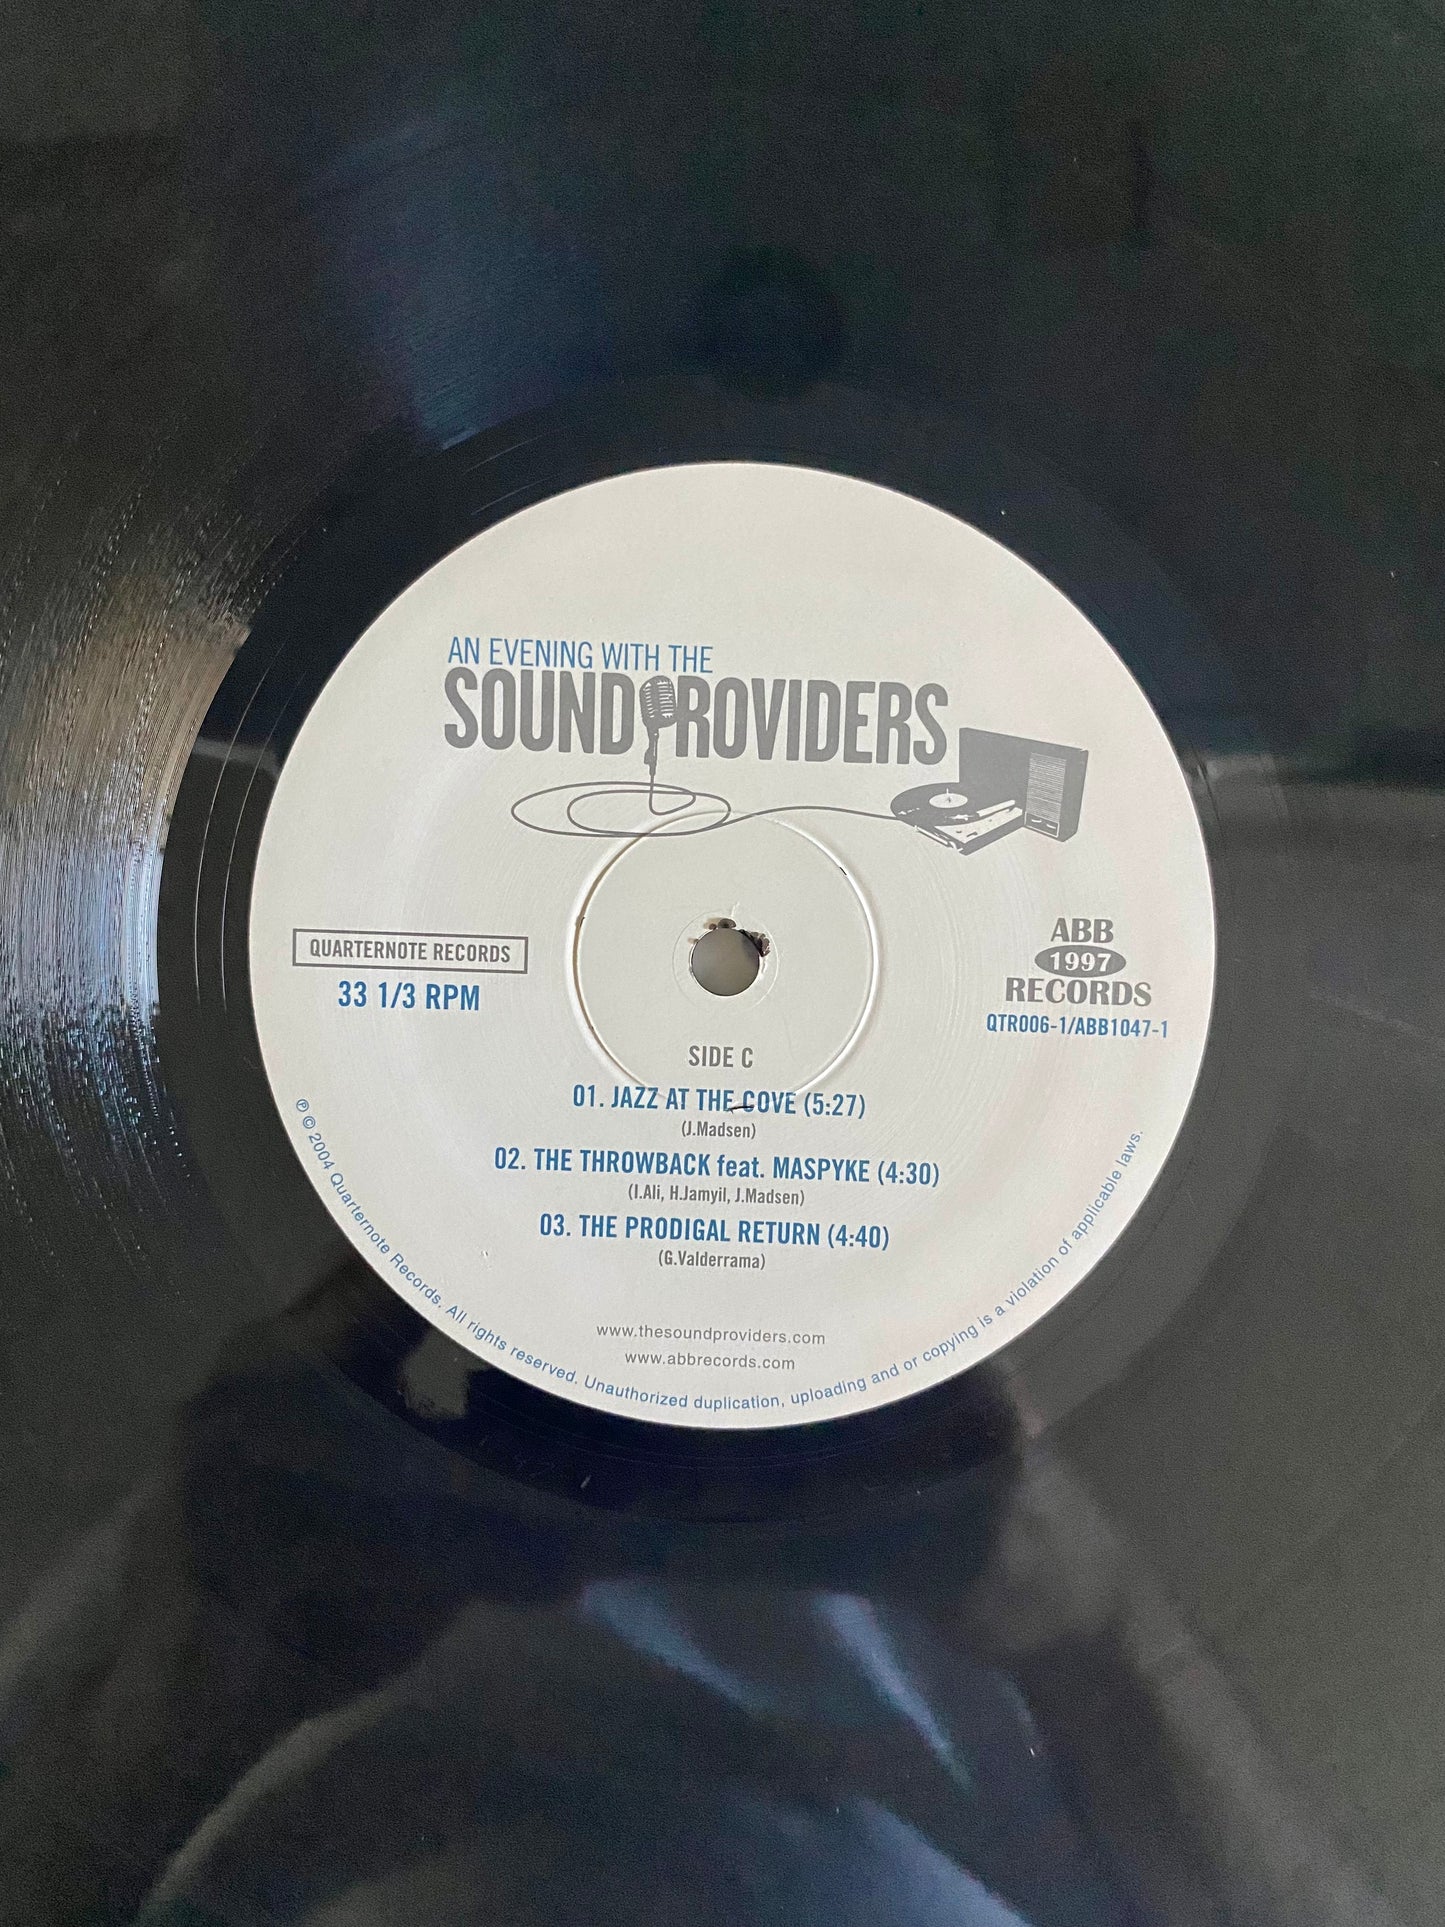 Sound Providers - An Evening With The Sound Providers (2xLP, Album). HIP-HOP